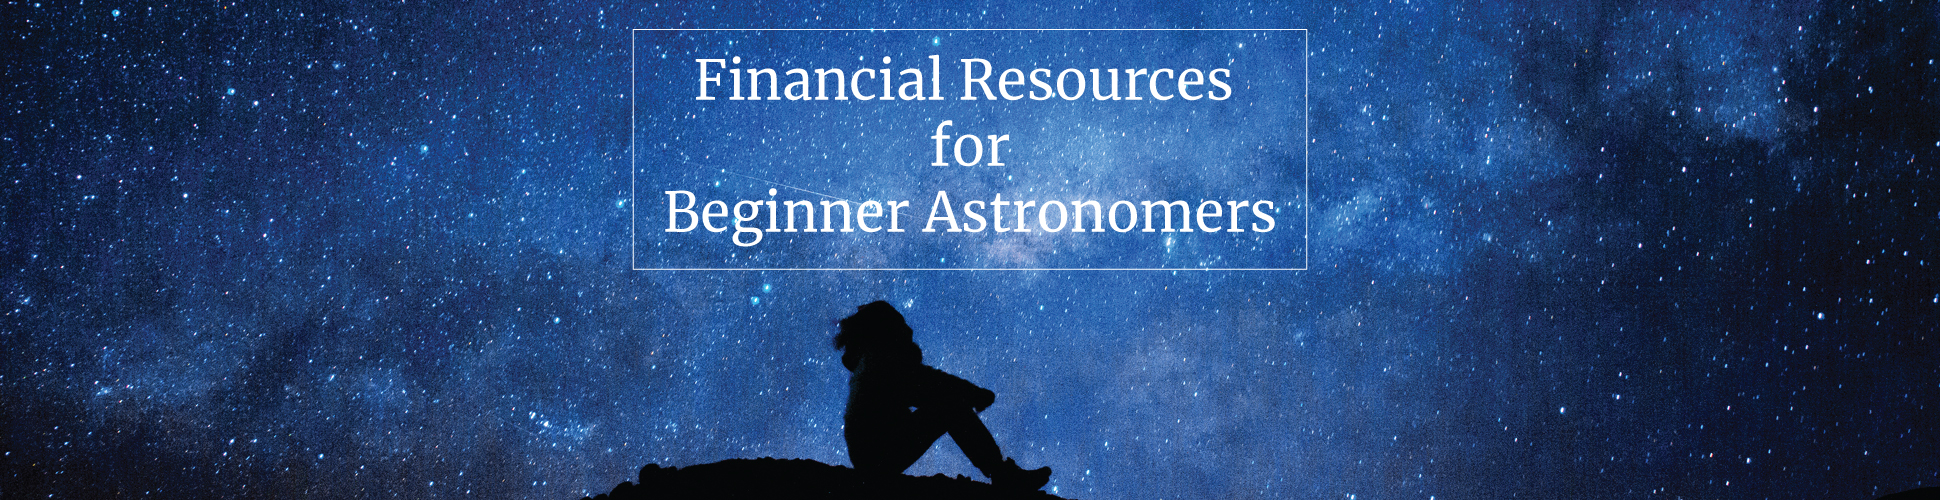 Financial Resources for Beginner Astronomers